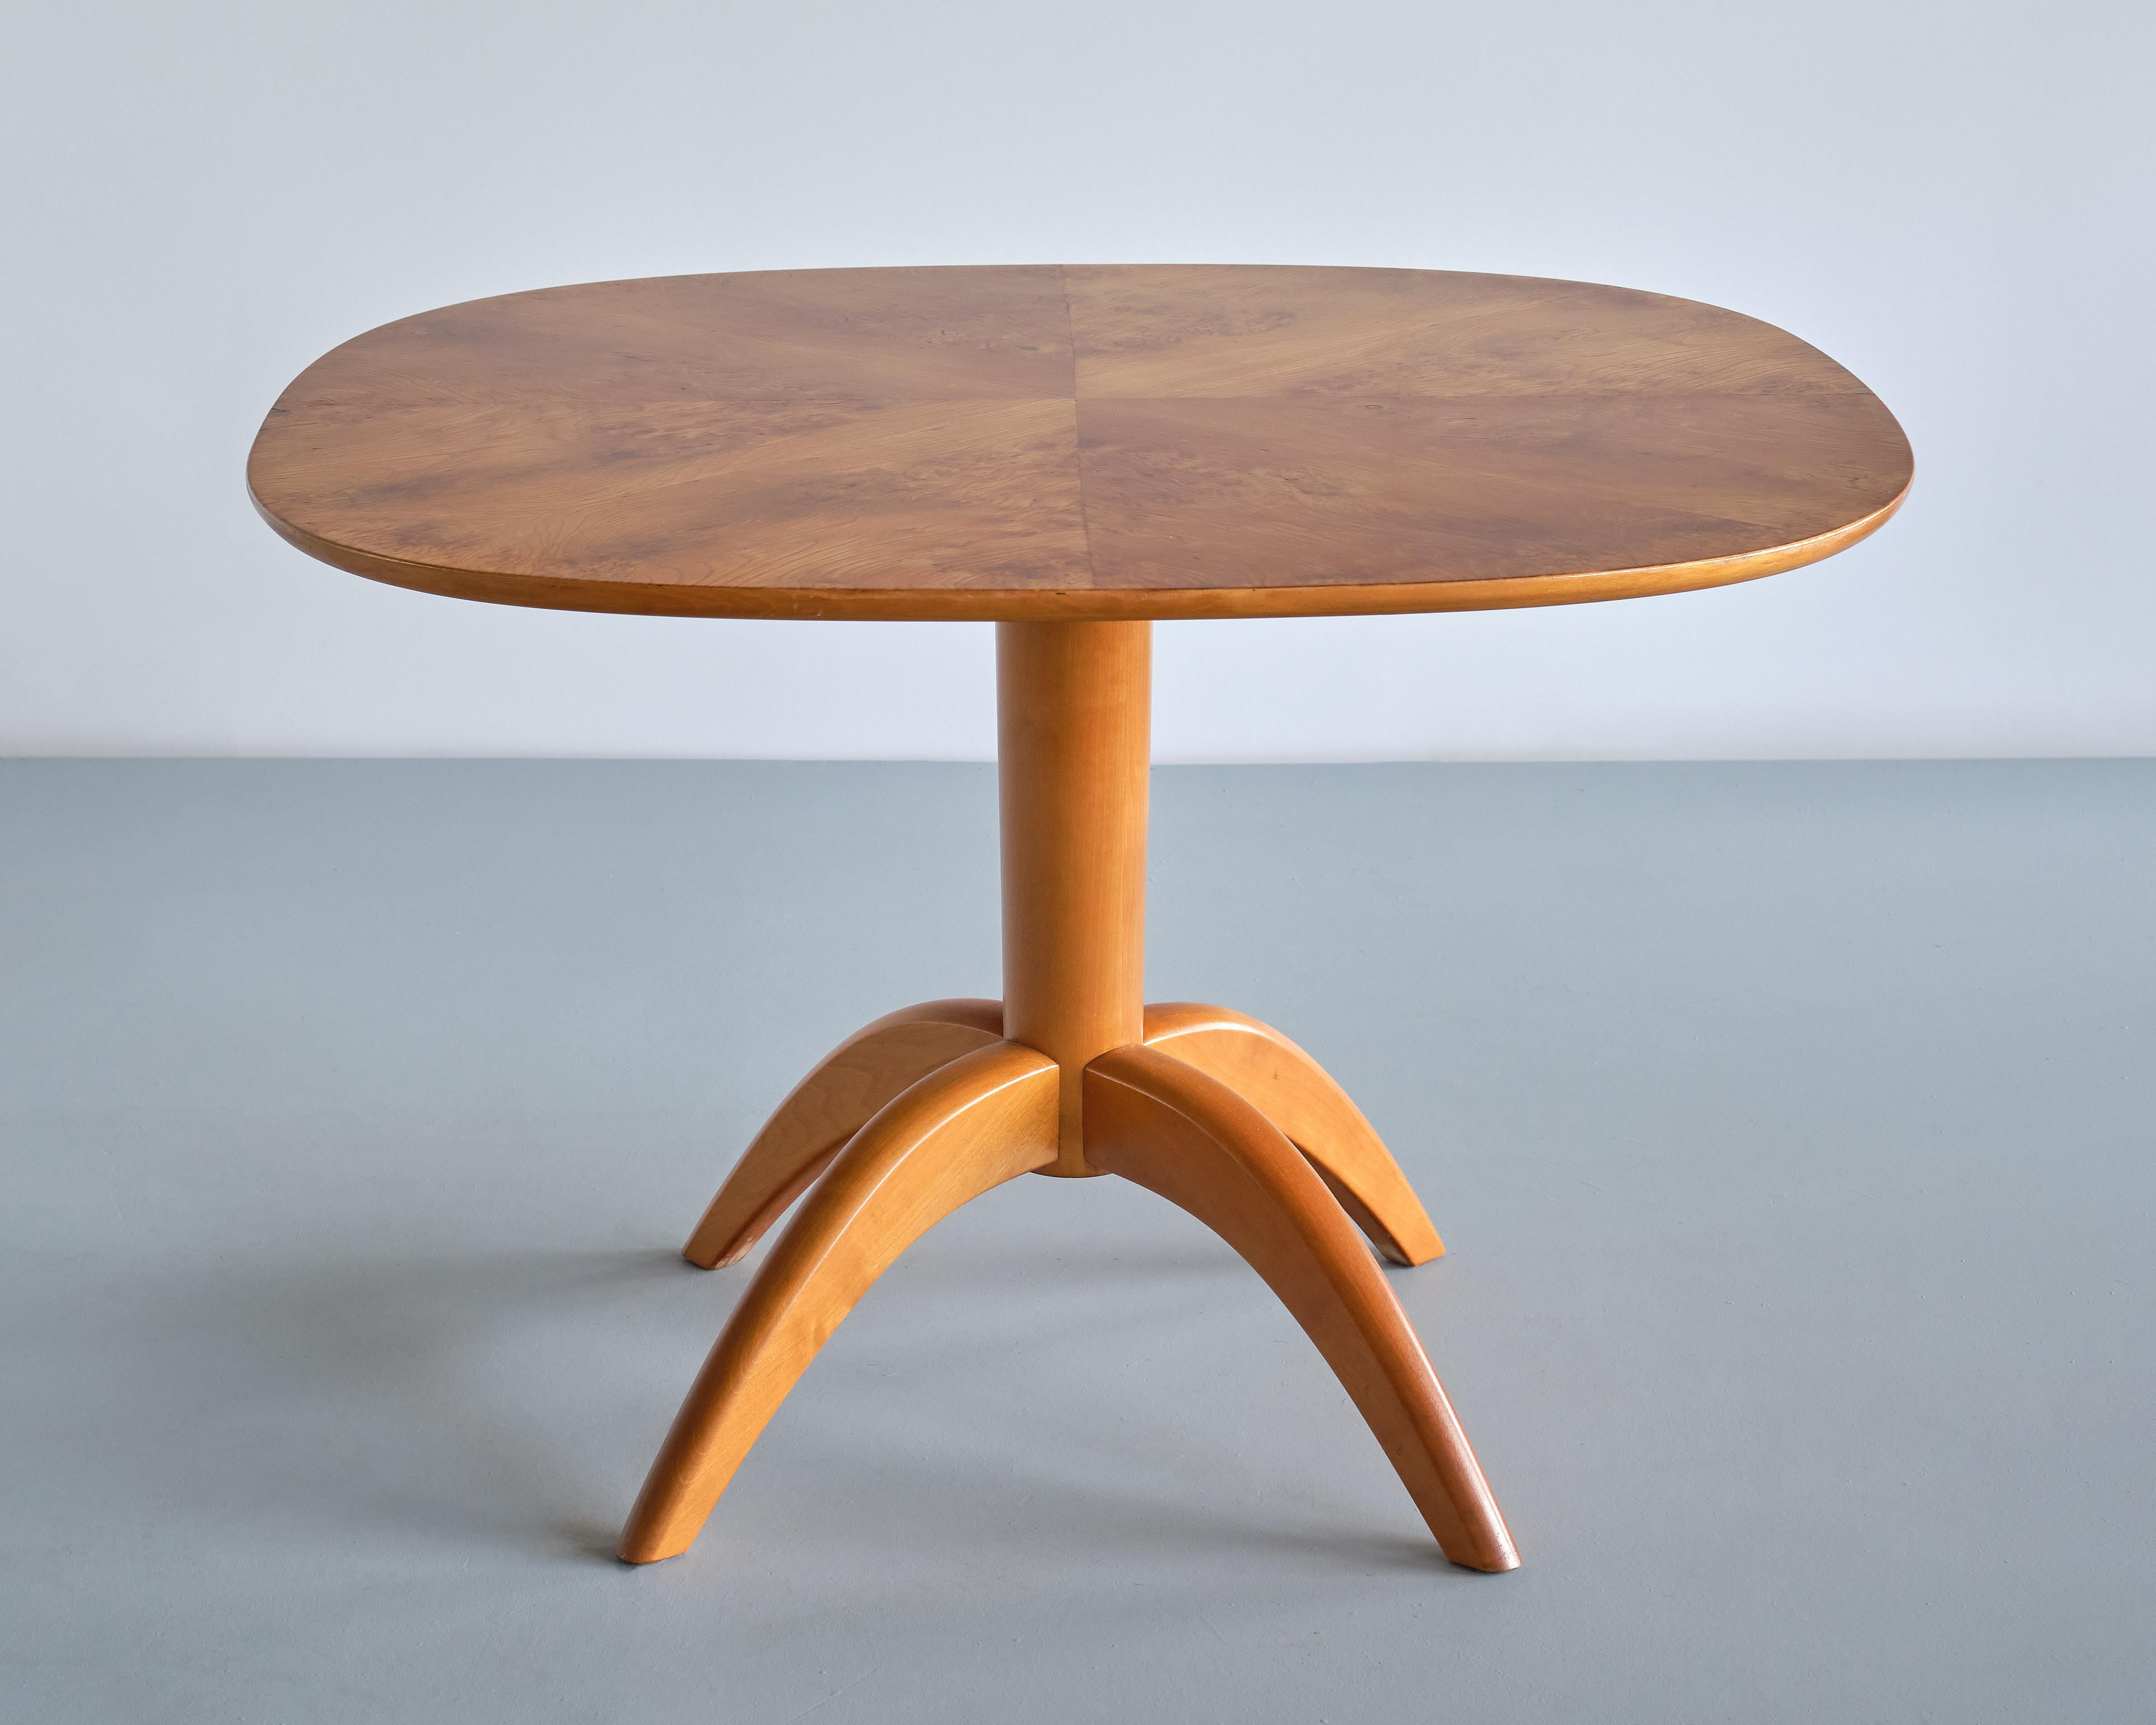 This elegant coffee table was designed by Bertil Söderberg in the mid 1930s. It was produced by the Swedish company Svensk Hemslöjd. 
The design is marked by the sculptural four legged base in solid elm wood.
The top is in a rounded square shape and